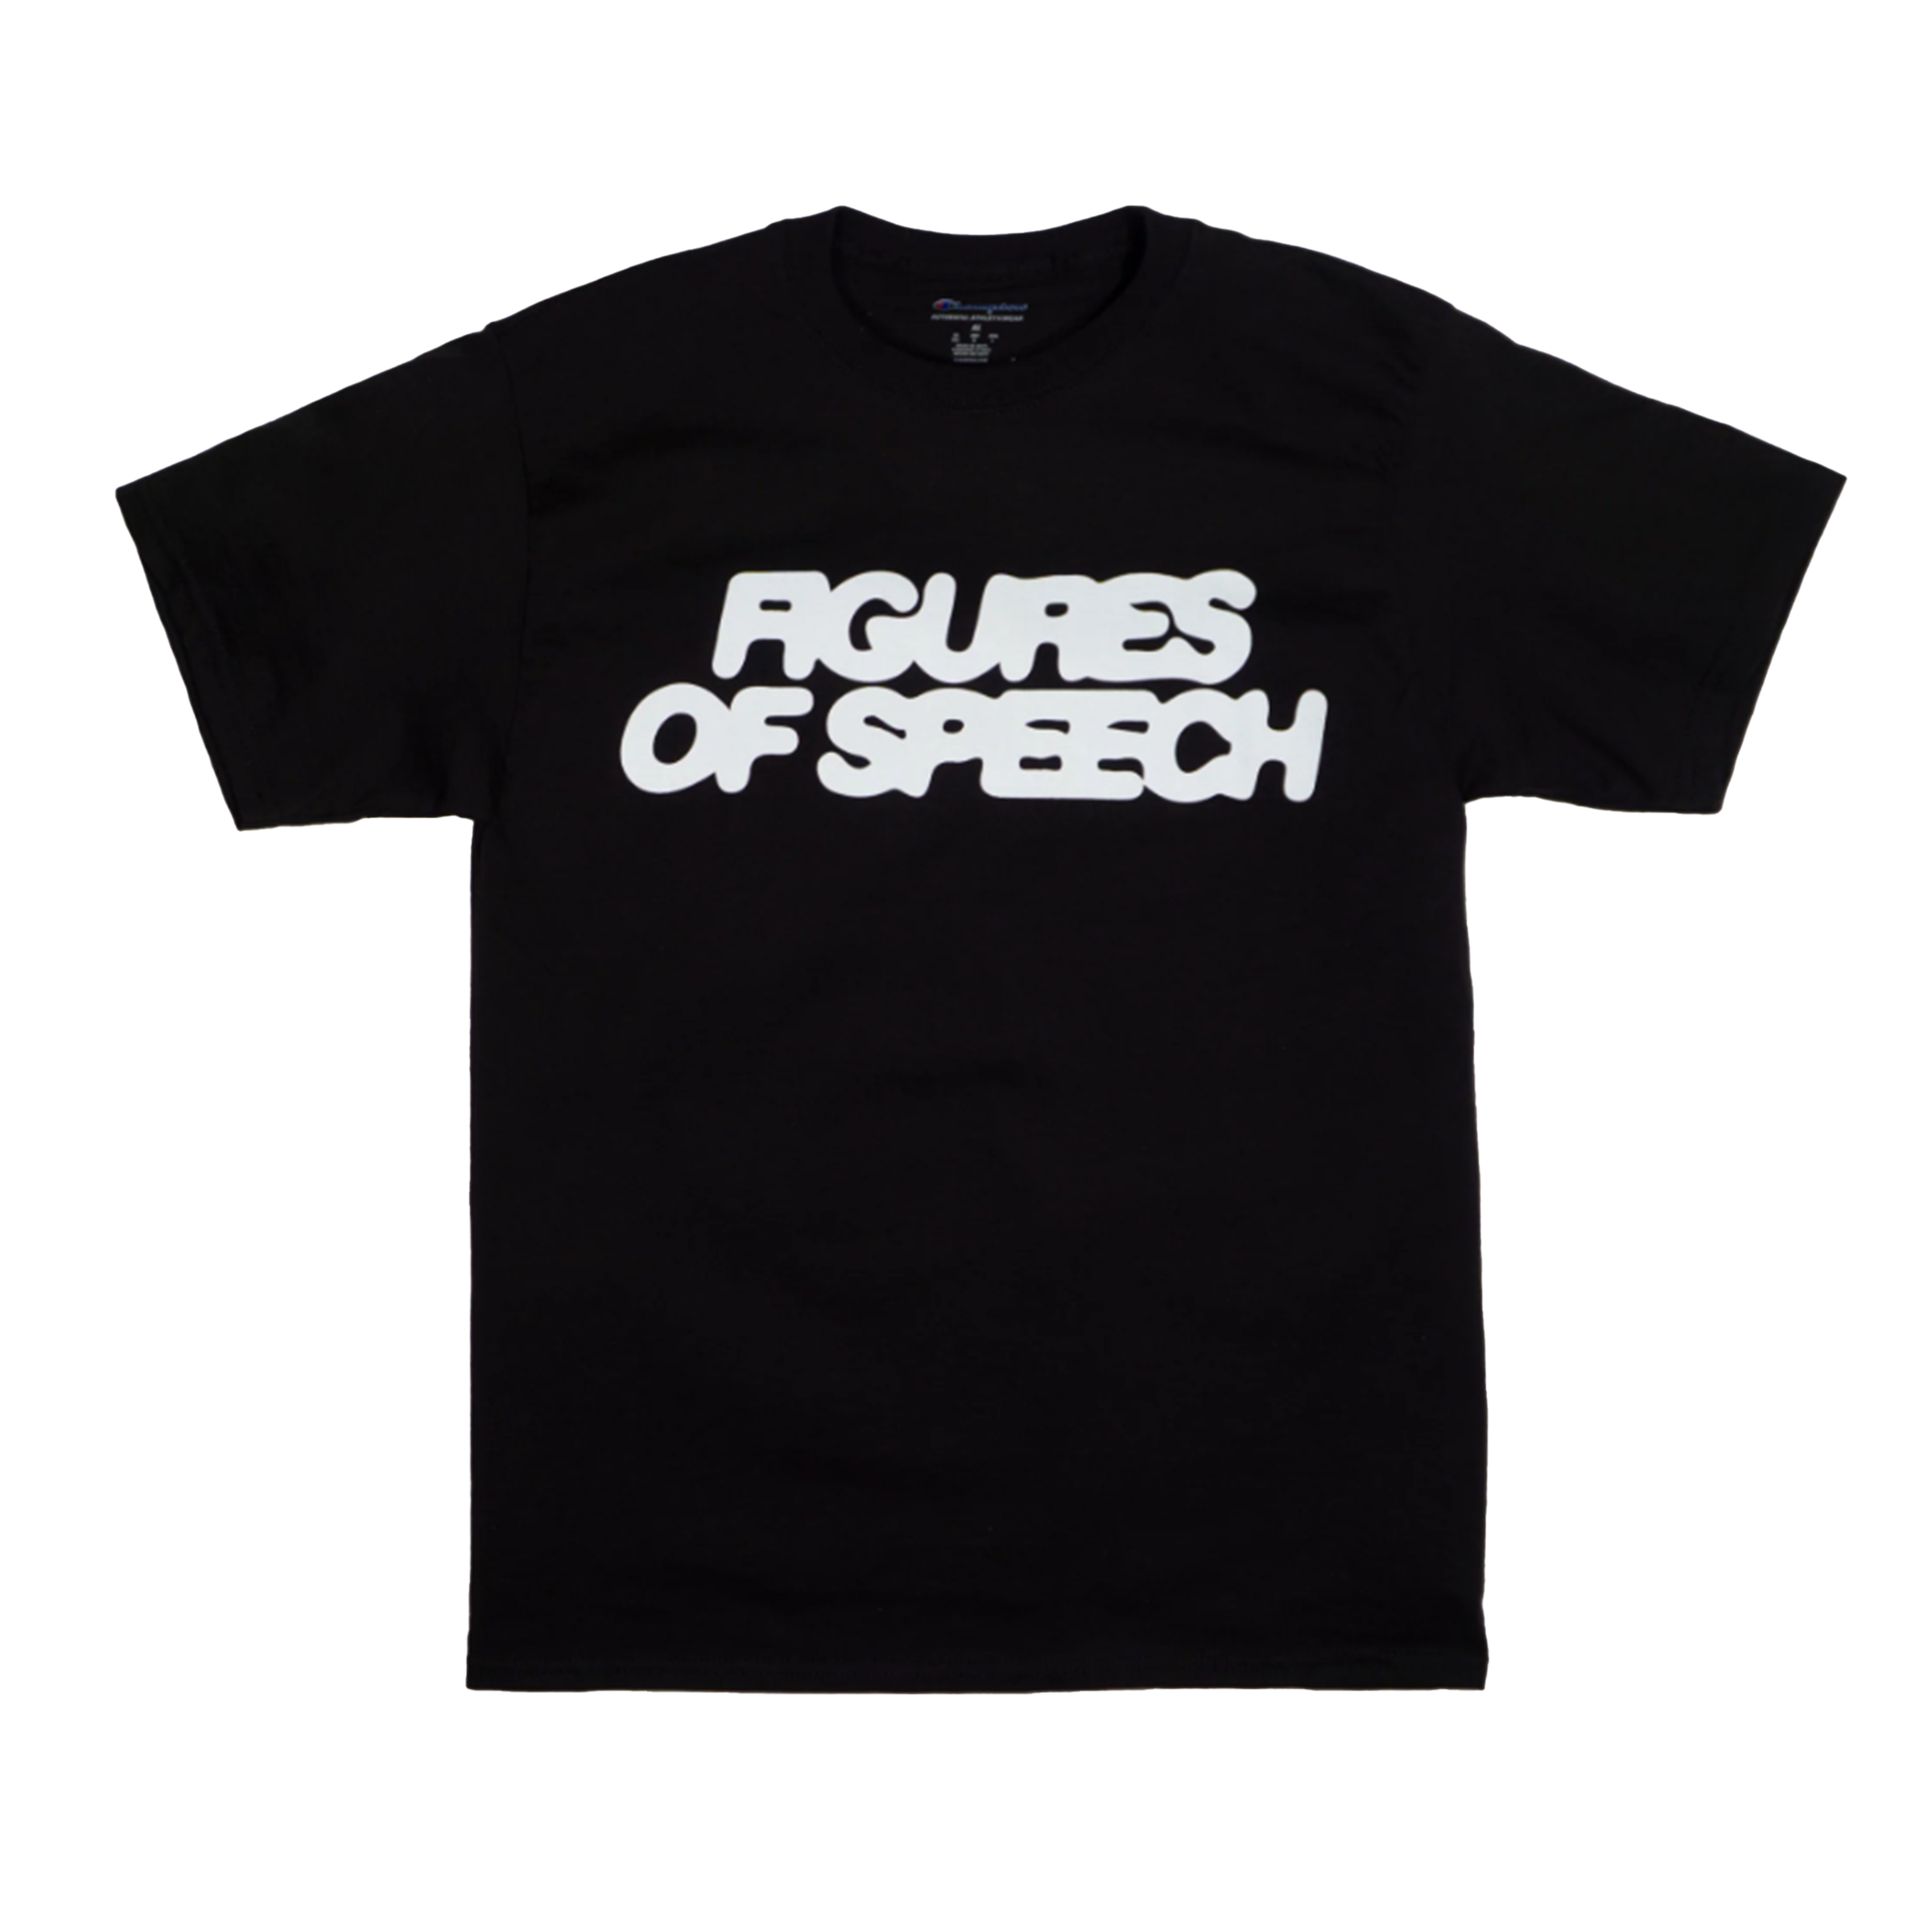 RAW CULT x ONYX - South Suicide Queens/Do Not Follow T-Shirt (Black)